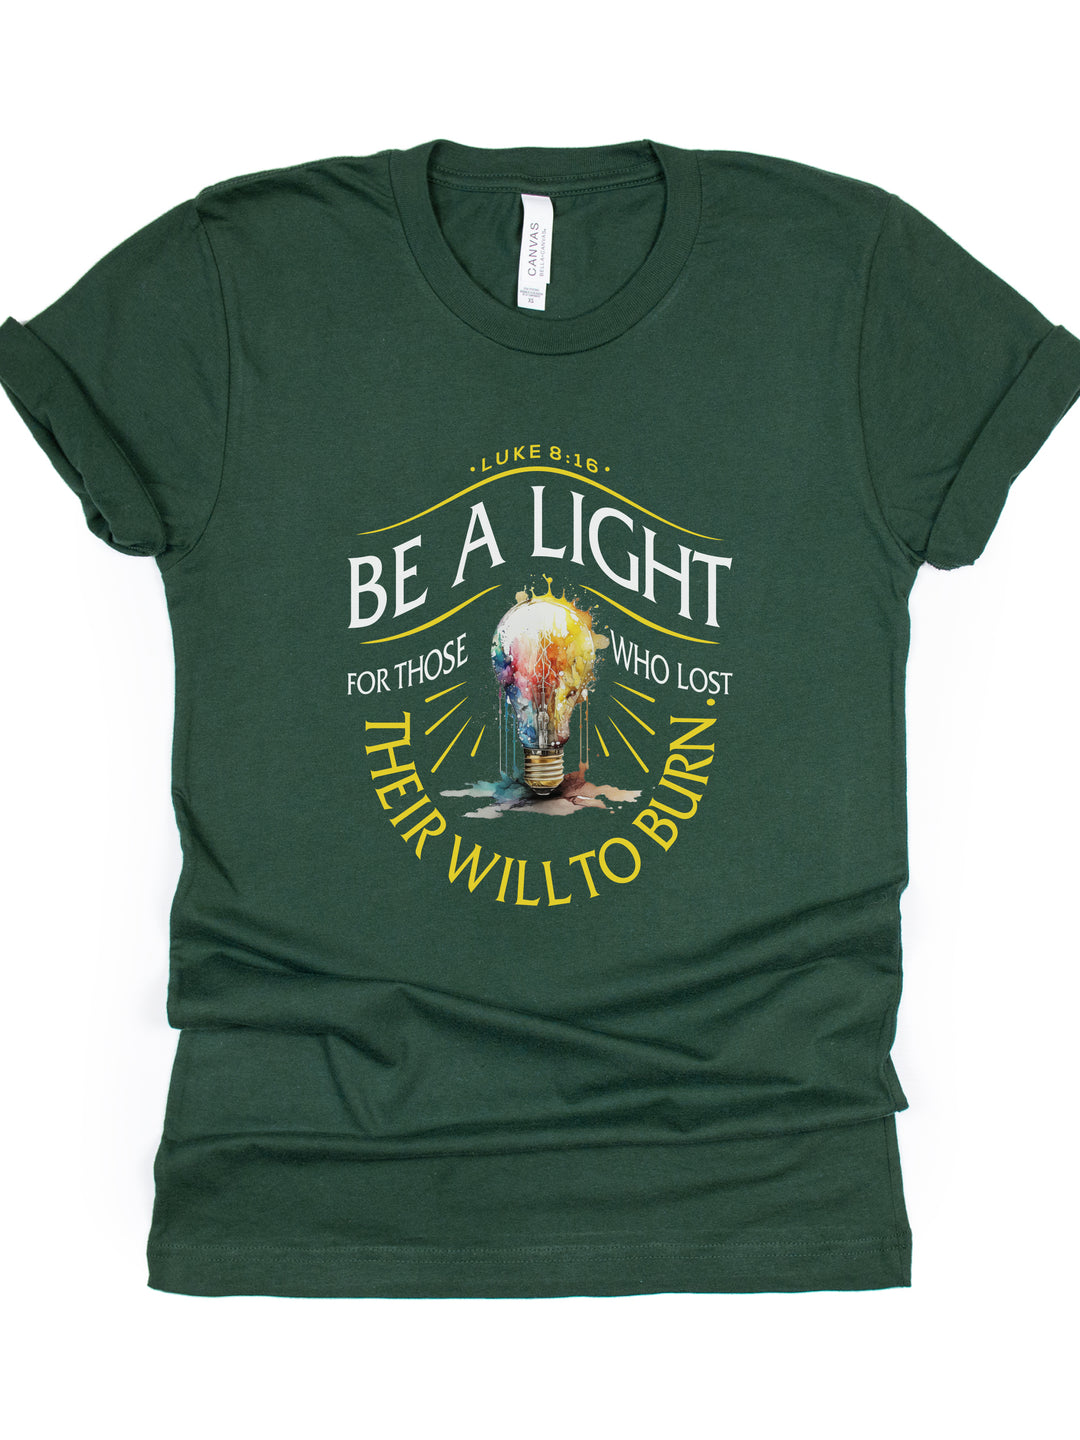 Be A Light For Those Who Lost Their Will To Burn - Unisex Crew-Neck Tee